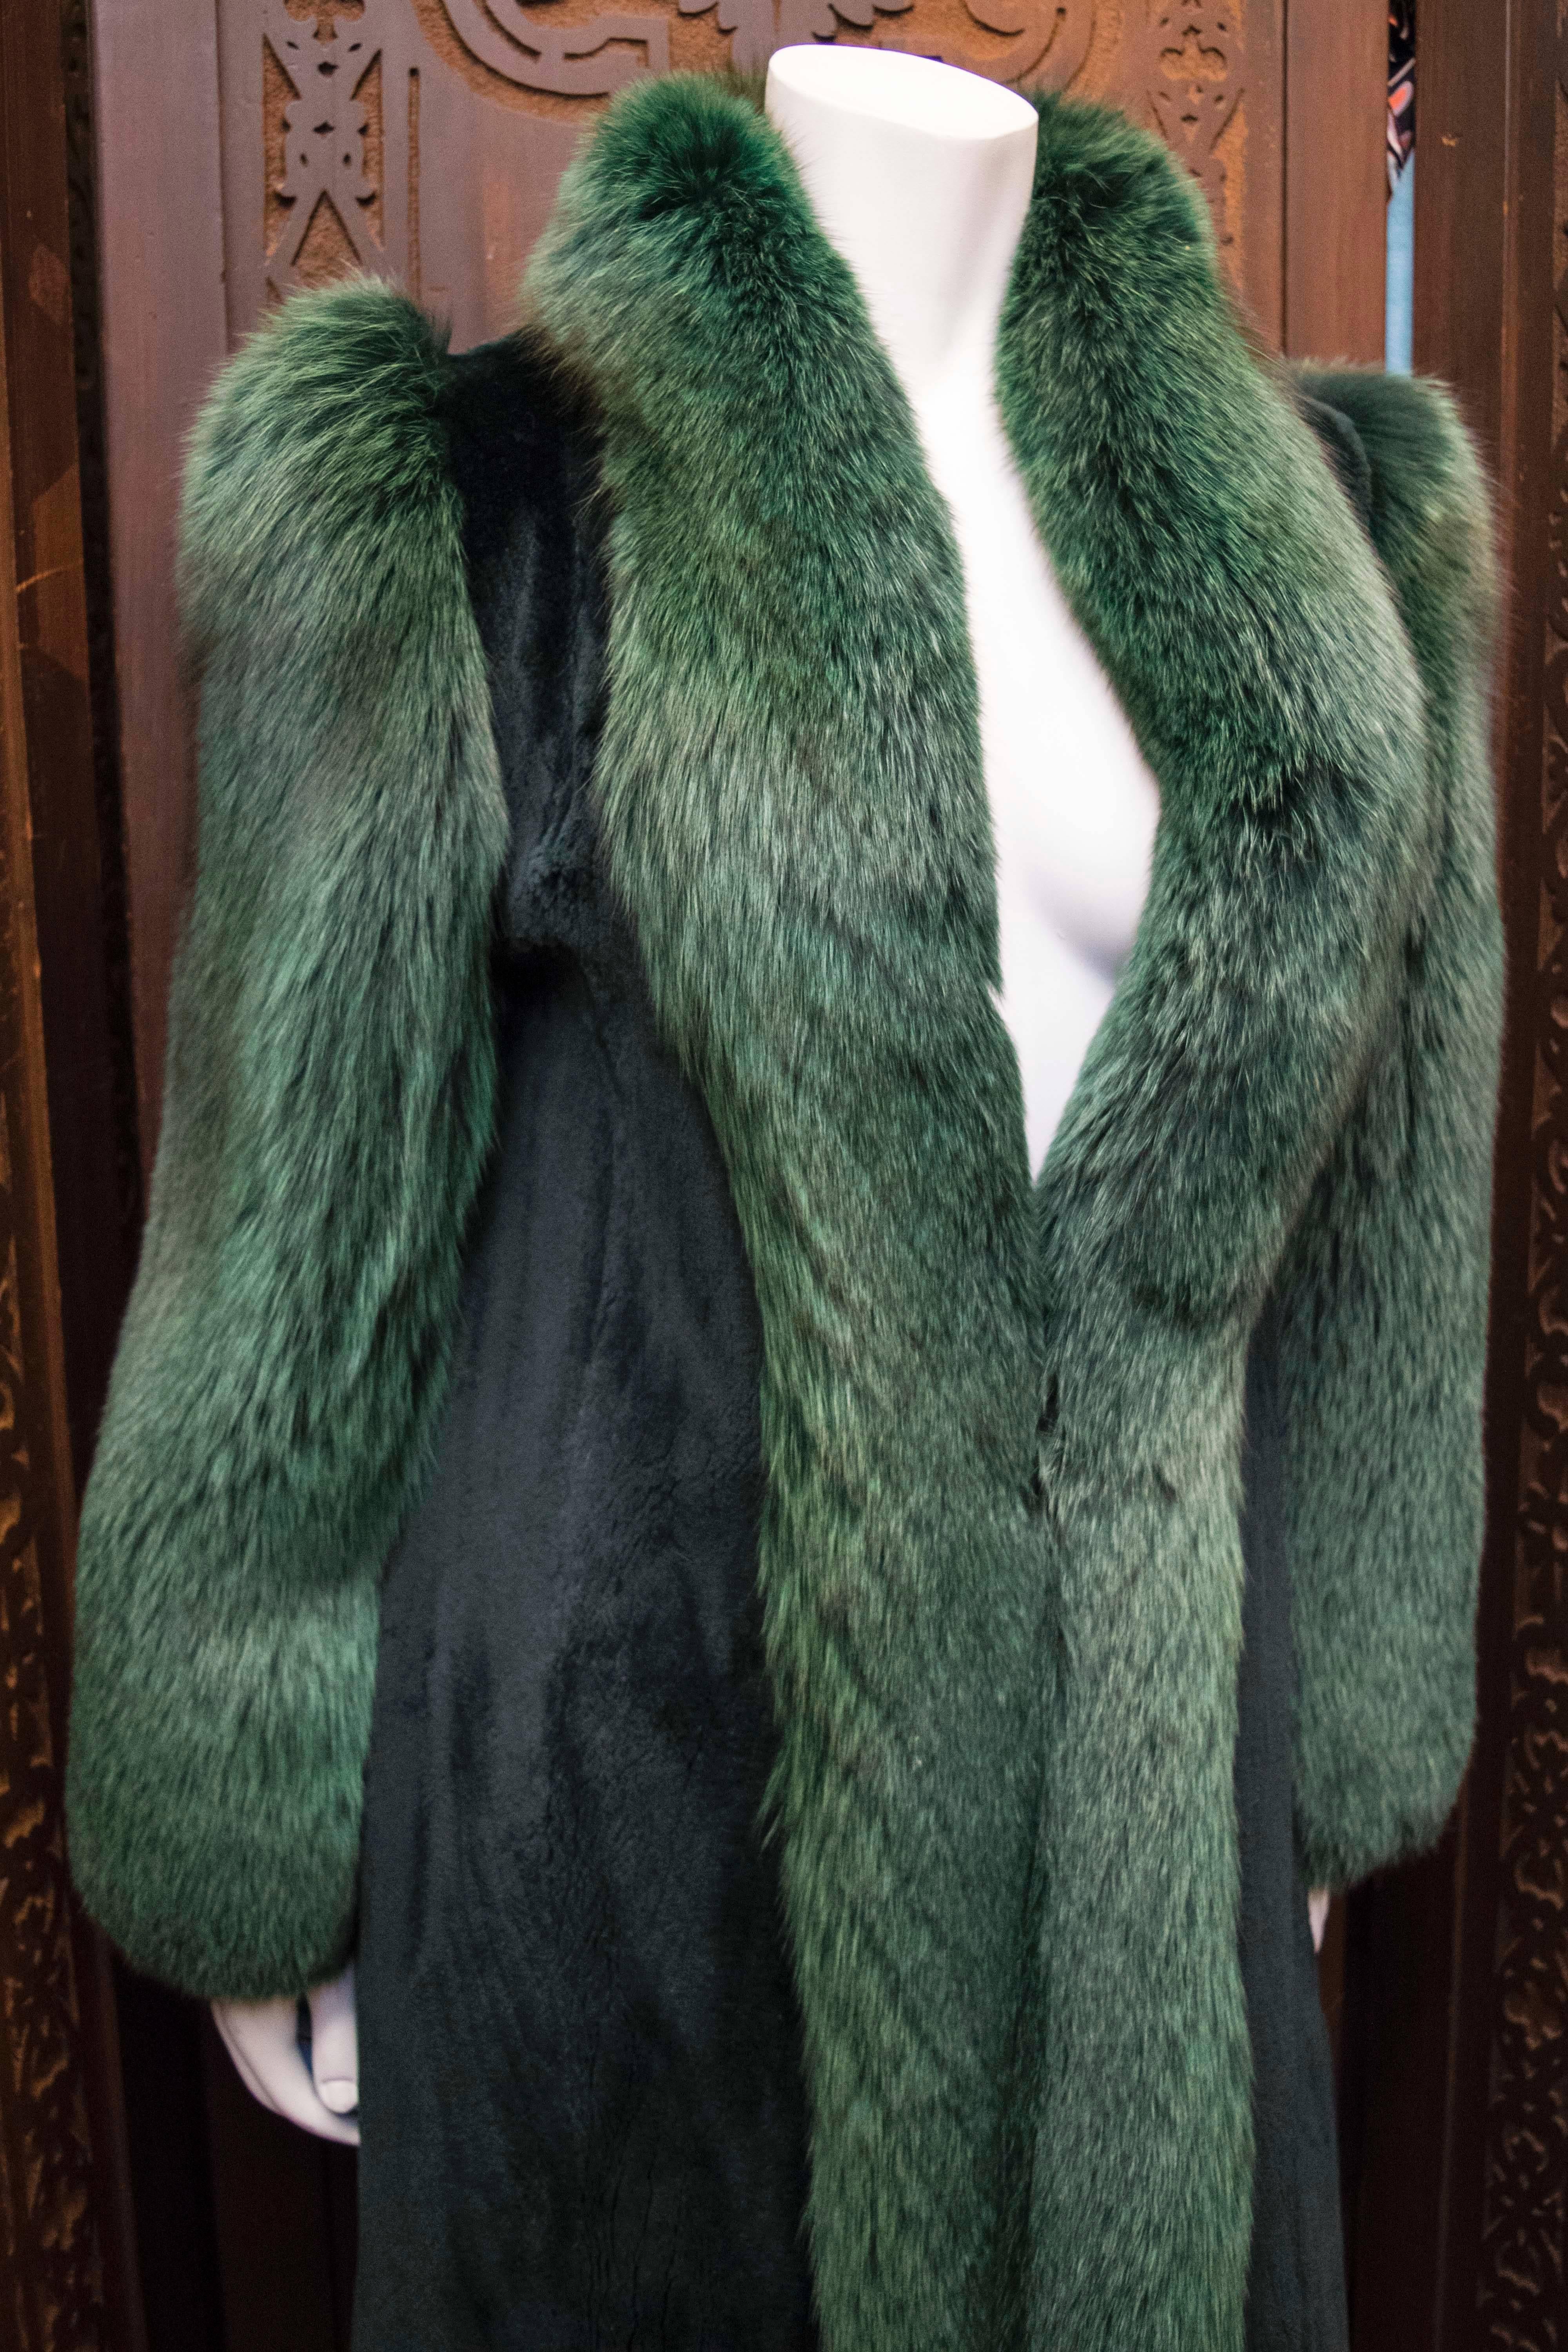 1980s Saks Fifth Avenue Green Fox and Sheered Mink Fur Coat

Opulent dyed green sheered mink with dyed green fox fur sleeves and collar. A similar coat was produced in the Gucci AW11 collection. 

B 36
H 42
L 46